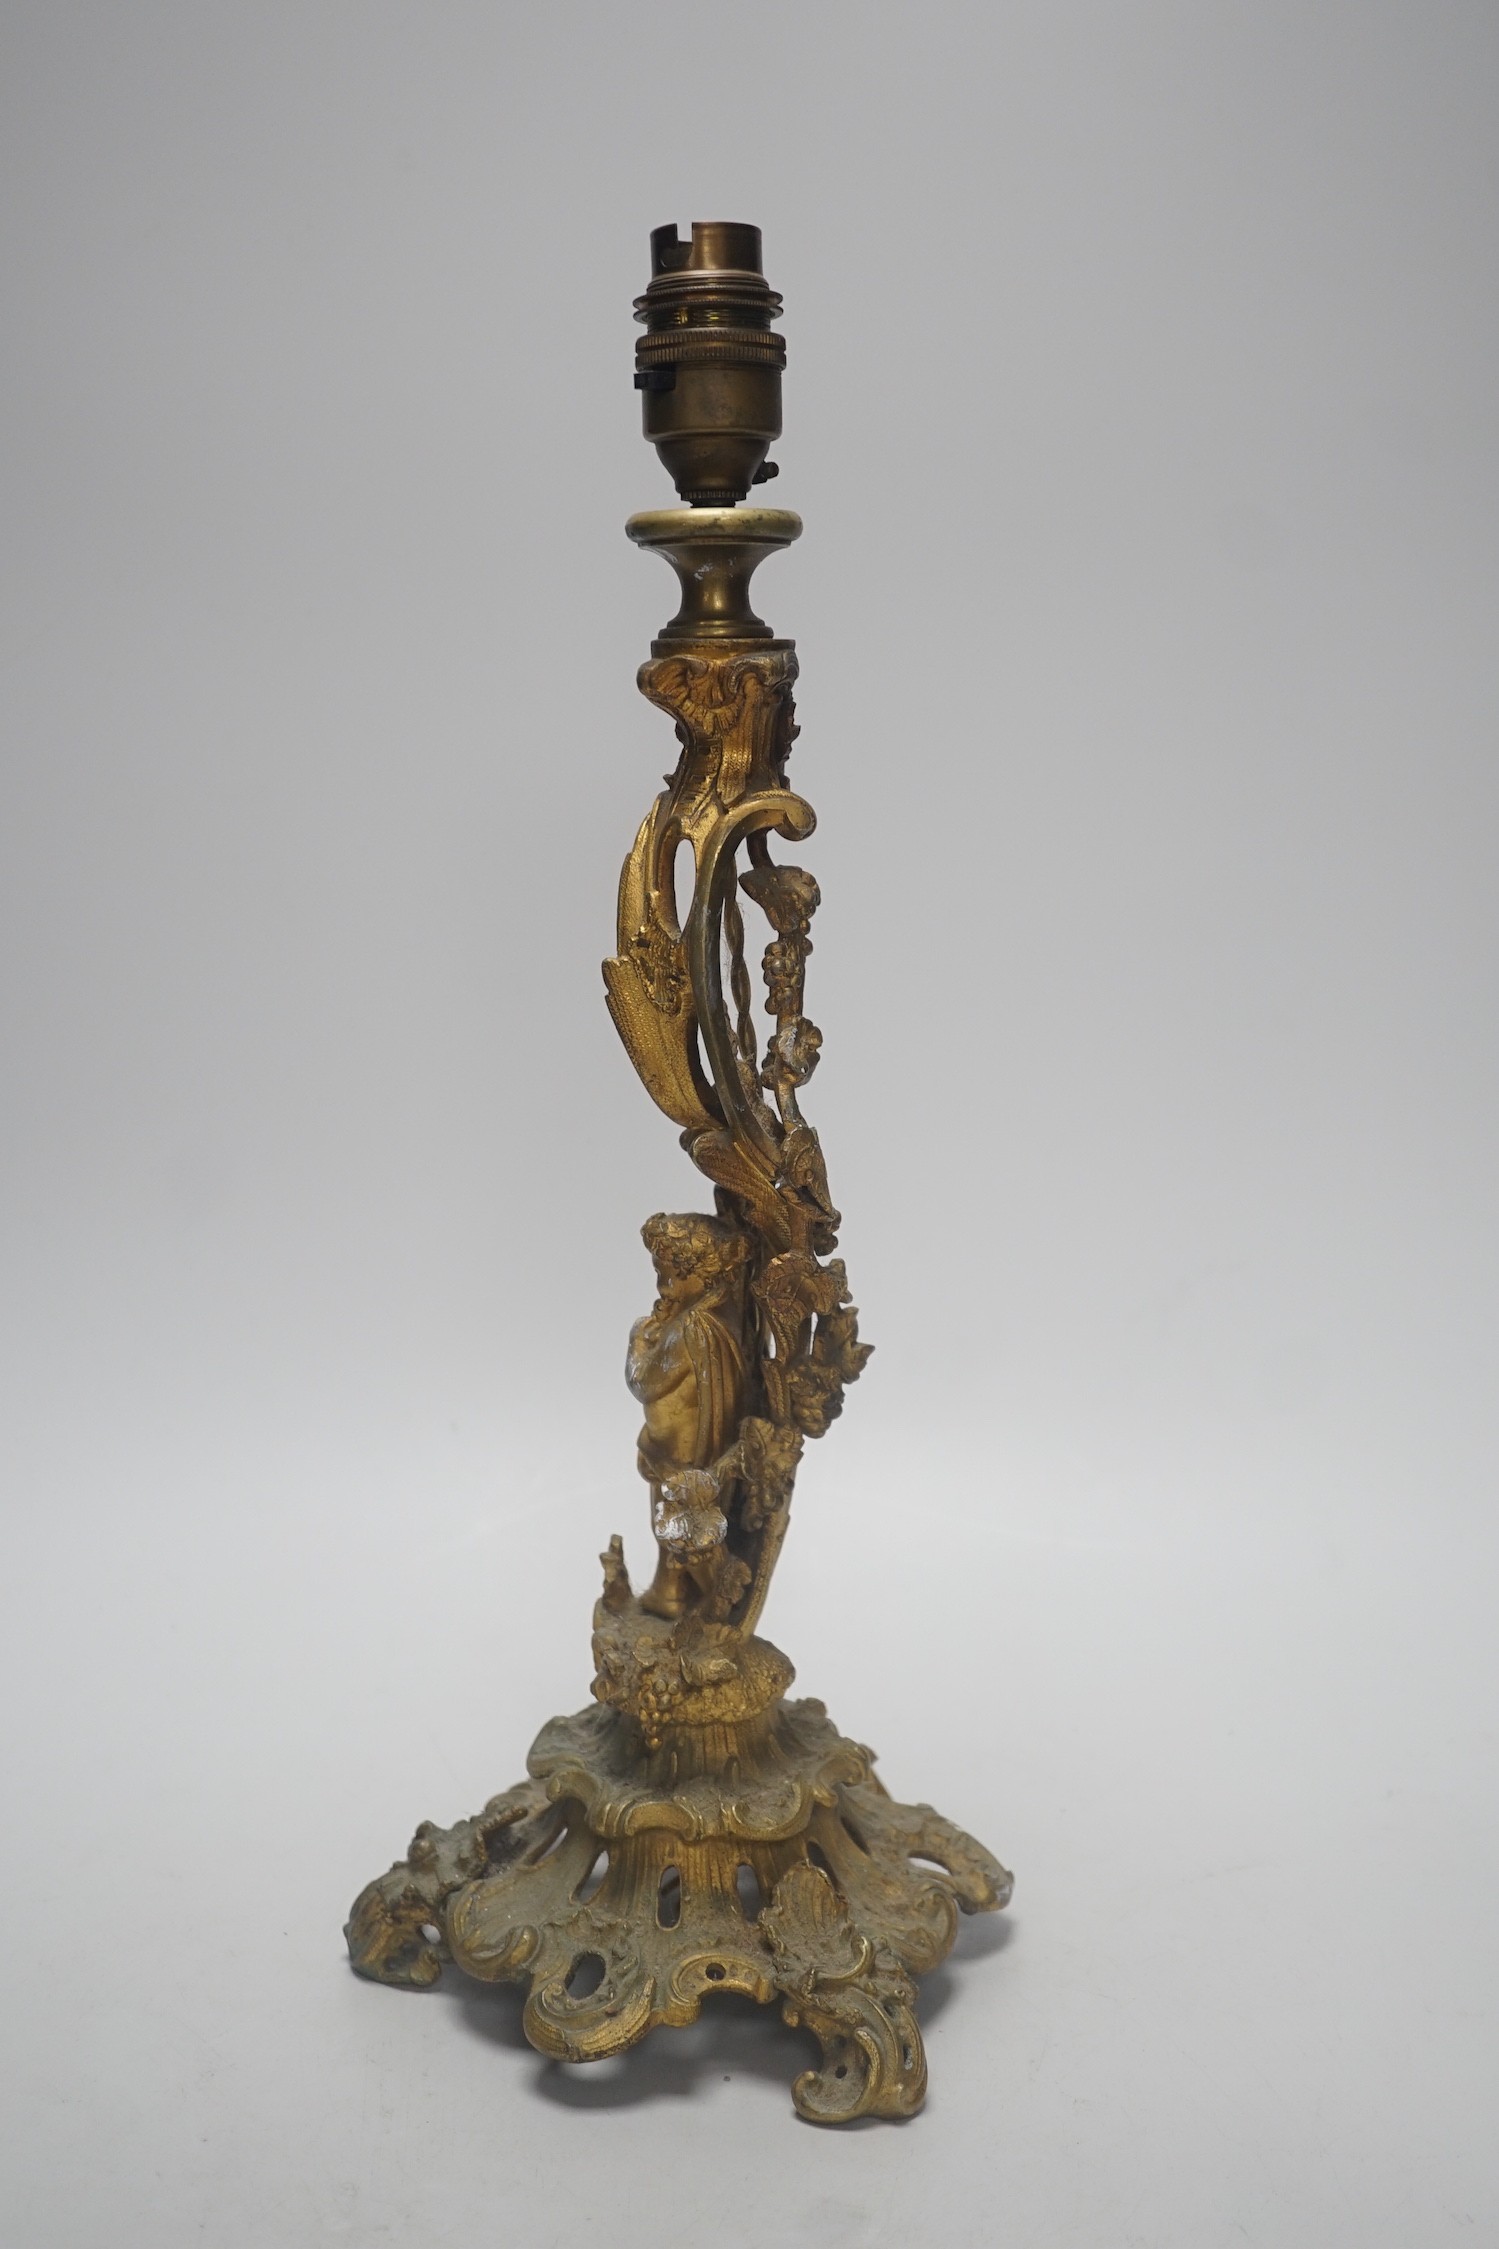 A 19th century French rococo style ormolu candlestick, converted to table lamp, 39cm tall